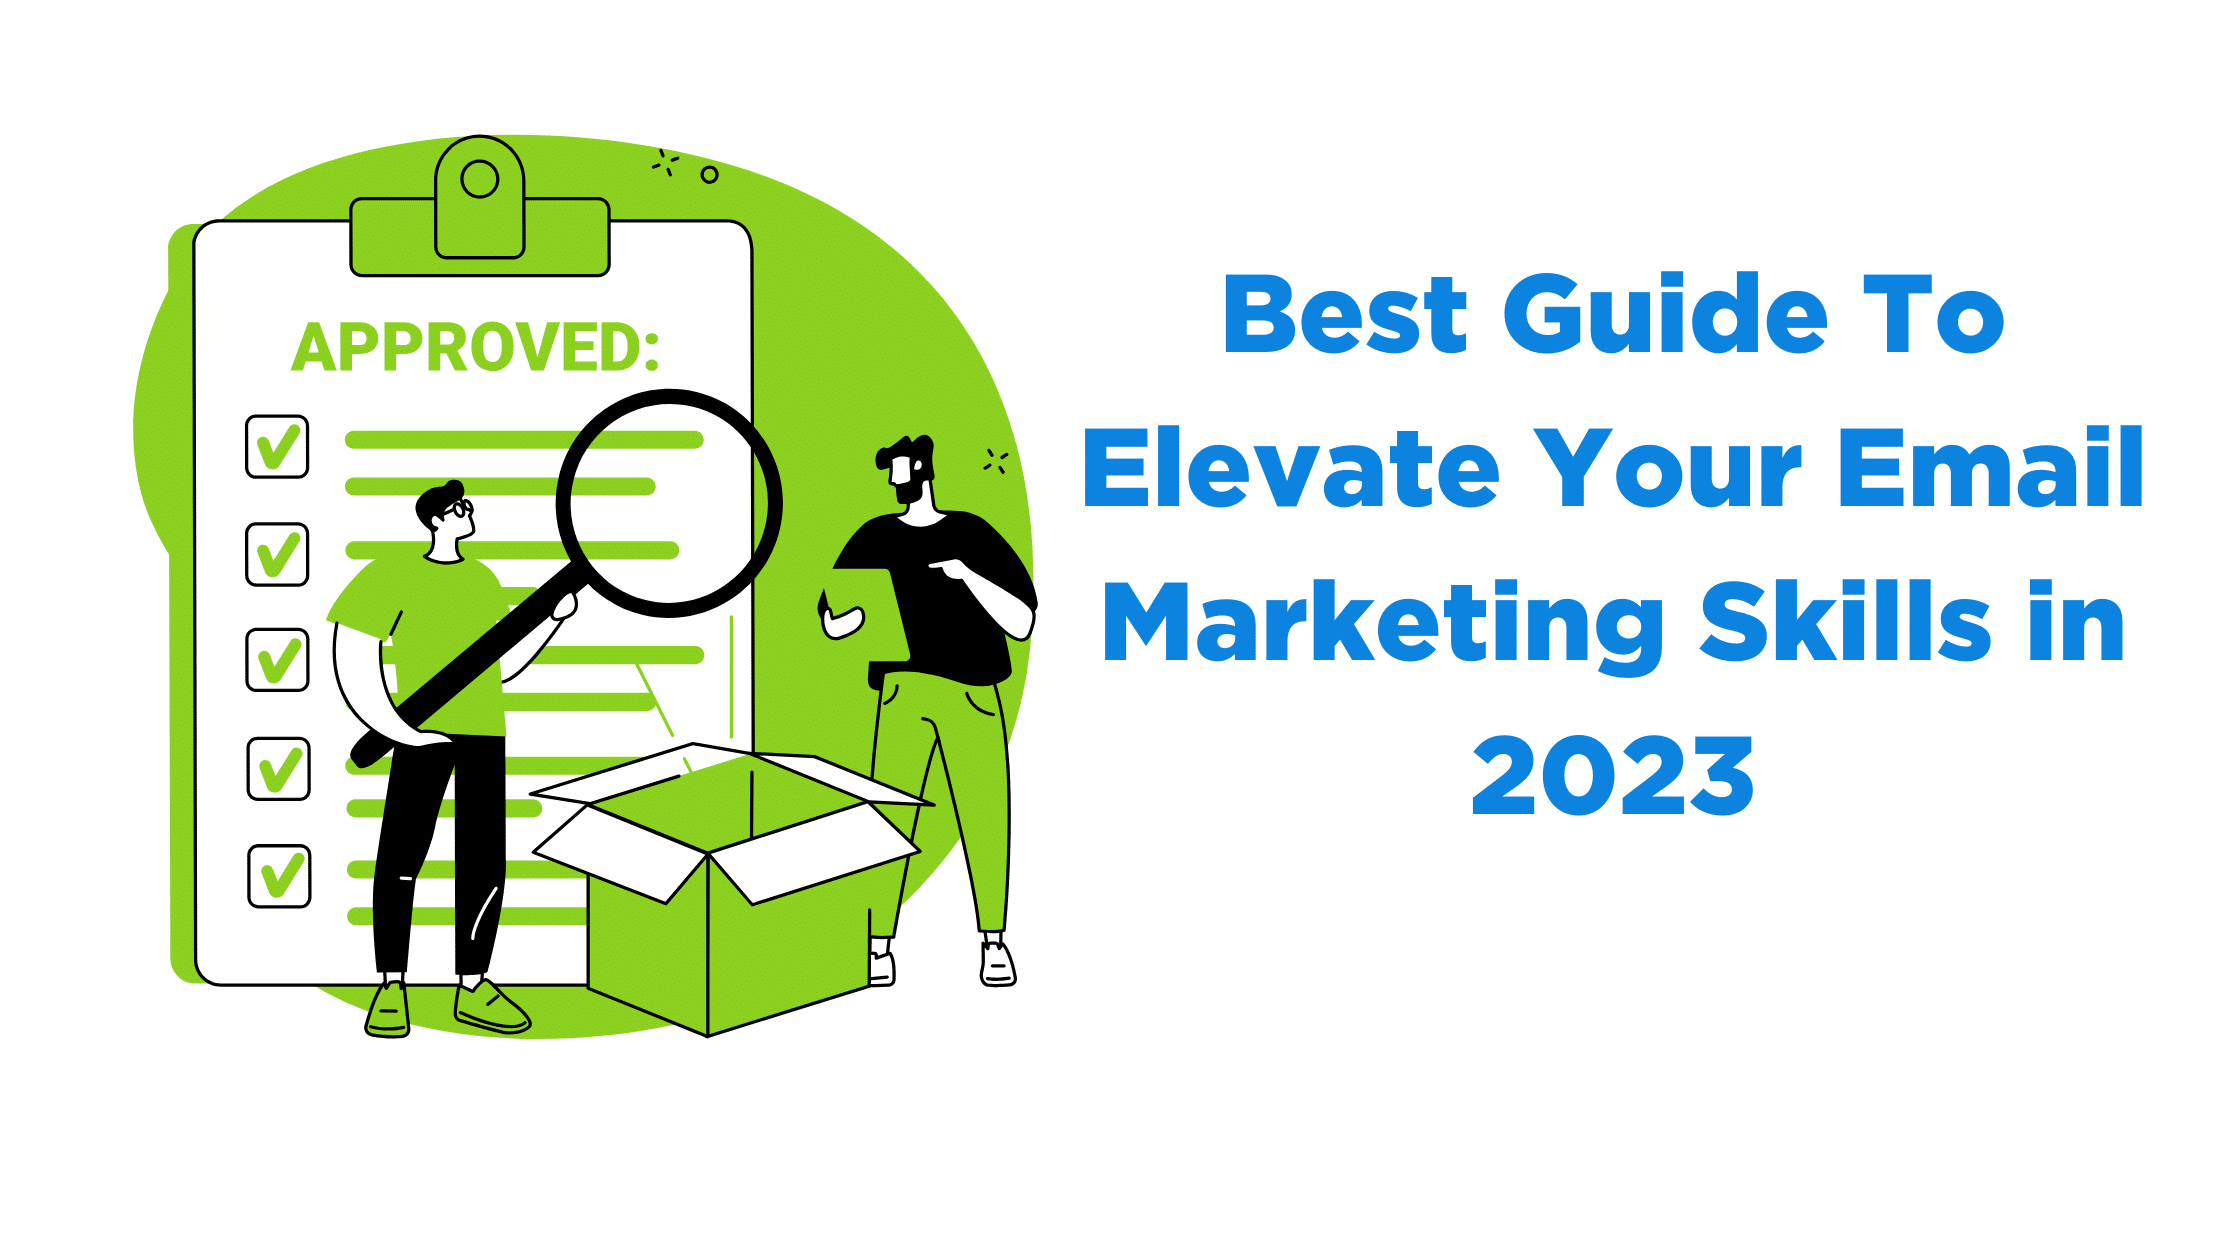 Best Guide To Elevate Your Email Marketing Skills in 2023